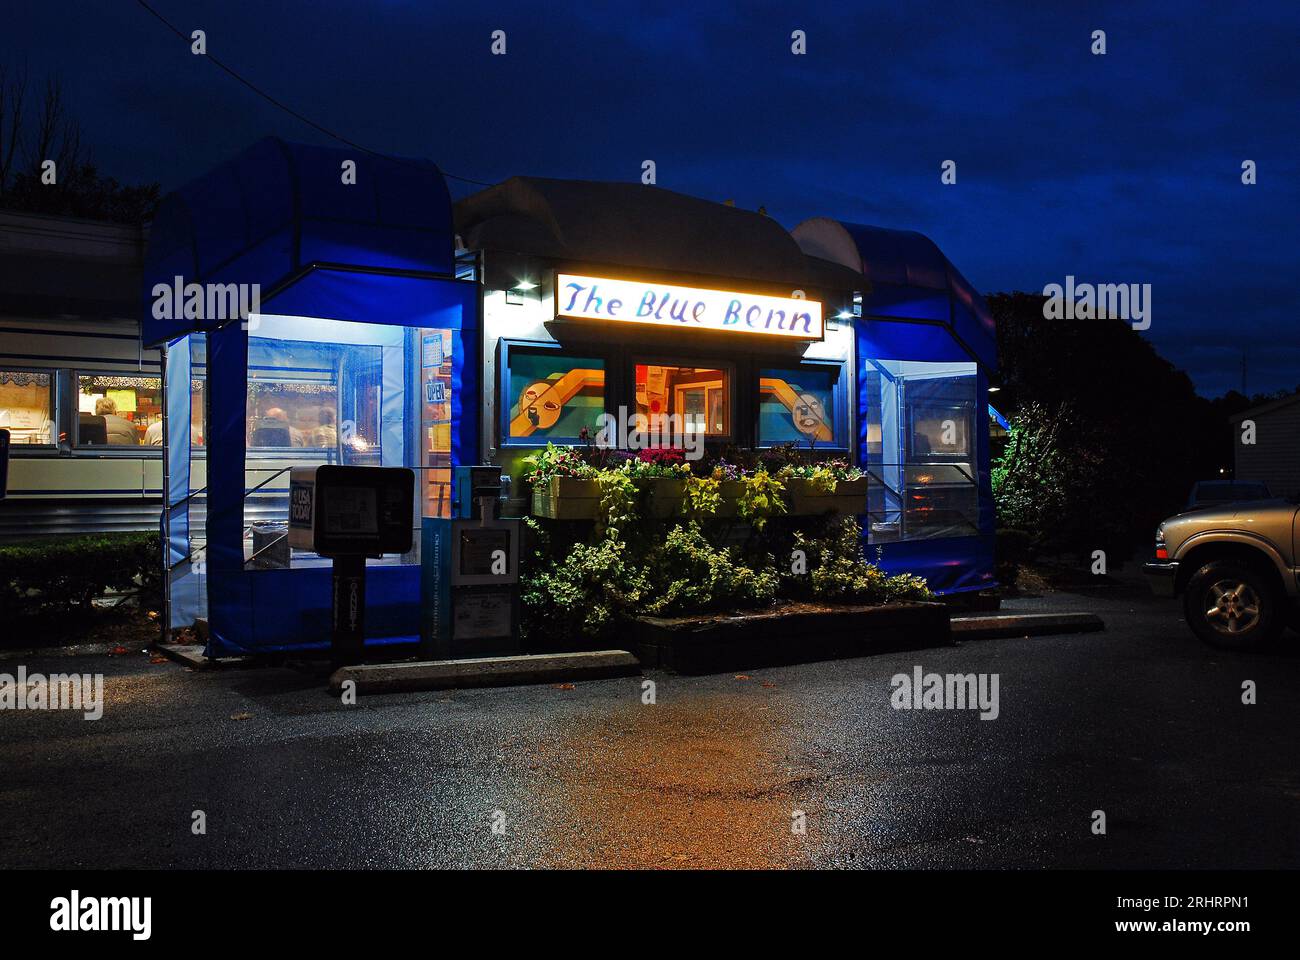 Twilight starts to glow behind the Blue Benn Diner, a classic railcar diner and cafe in Bennington, Vermont Stock Photo